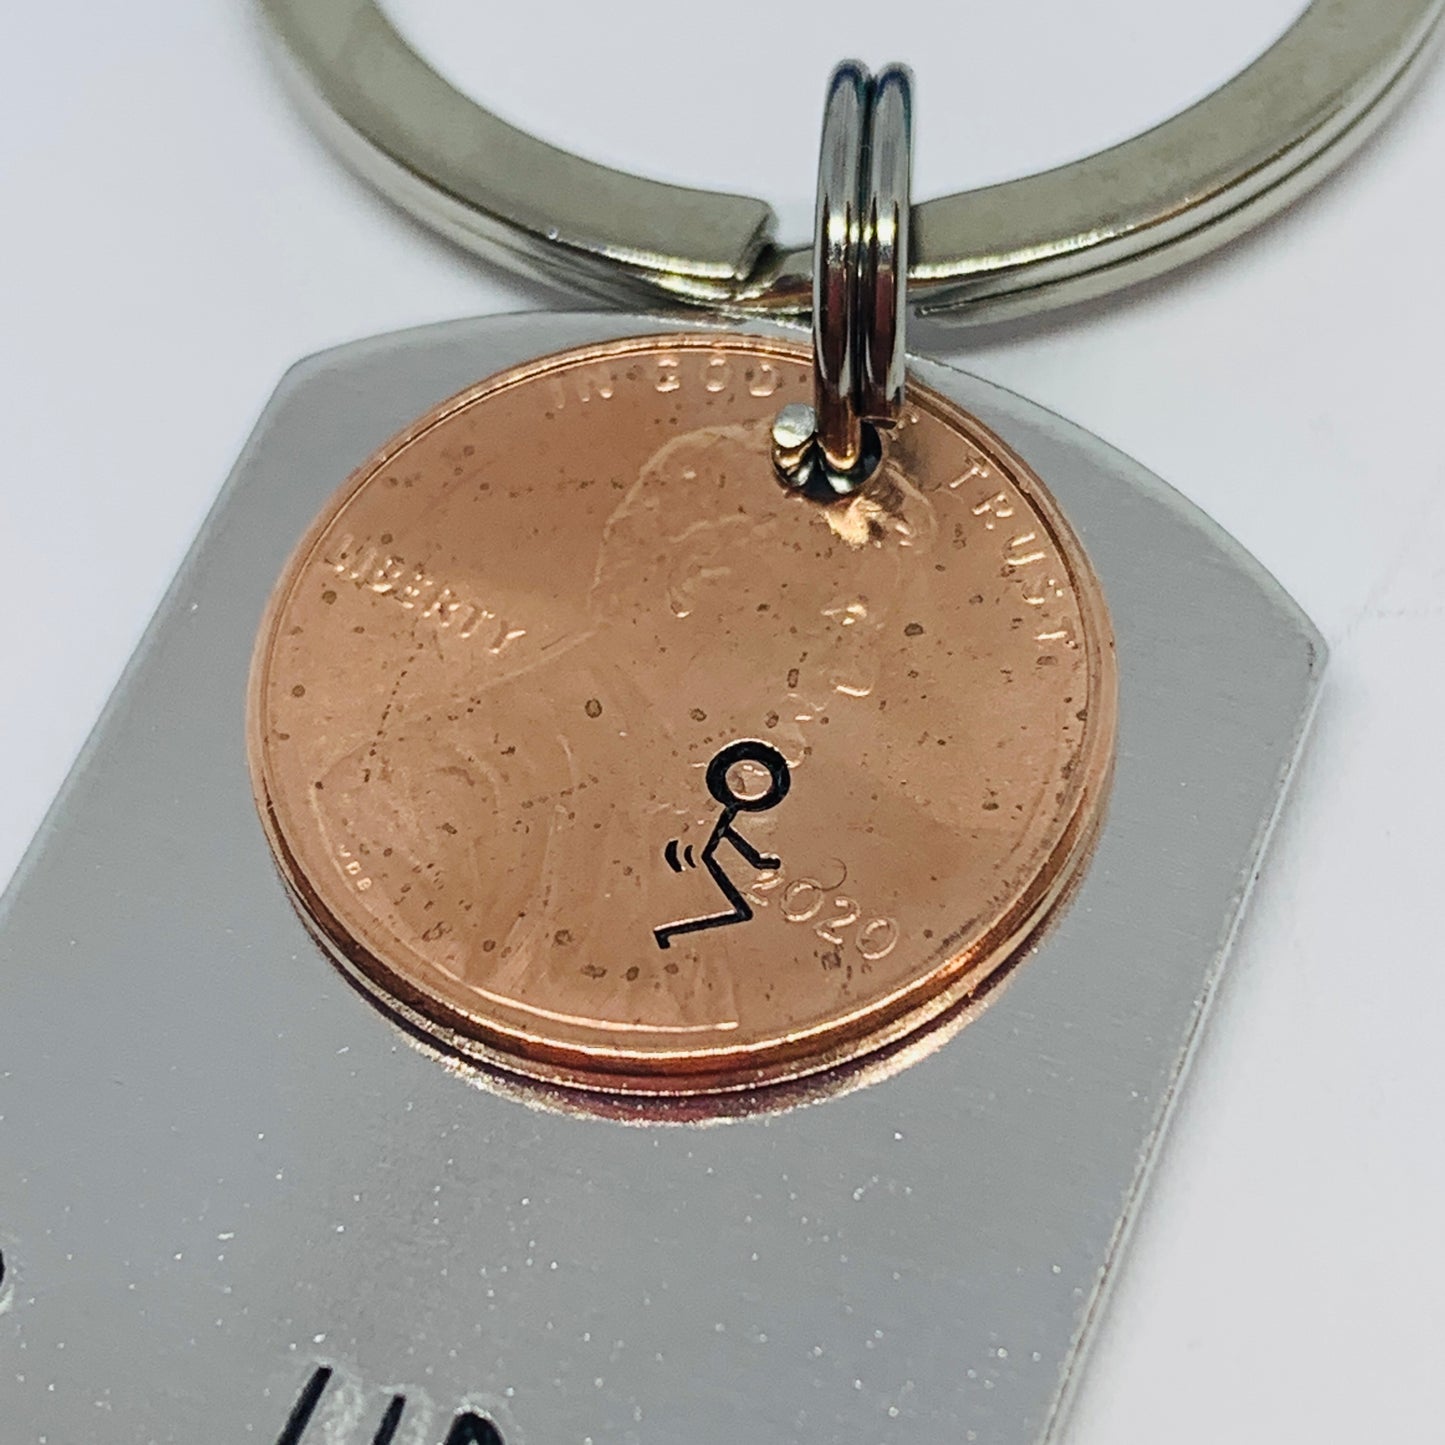 Up Yours 2020 with Penny - Hand Stamped Metal Key Ring | Dog Tag 2020 Penny | Humping 2020 Key Chain | Adult Mature | Dicks